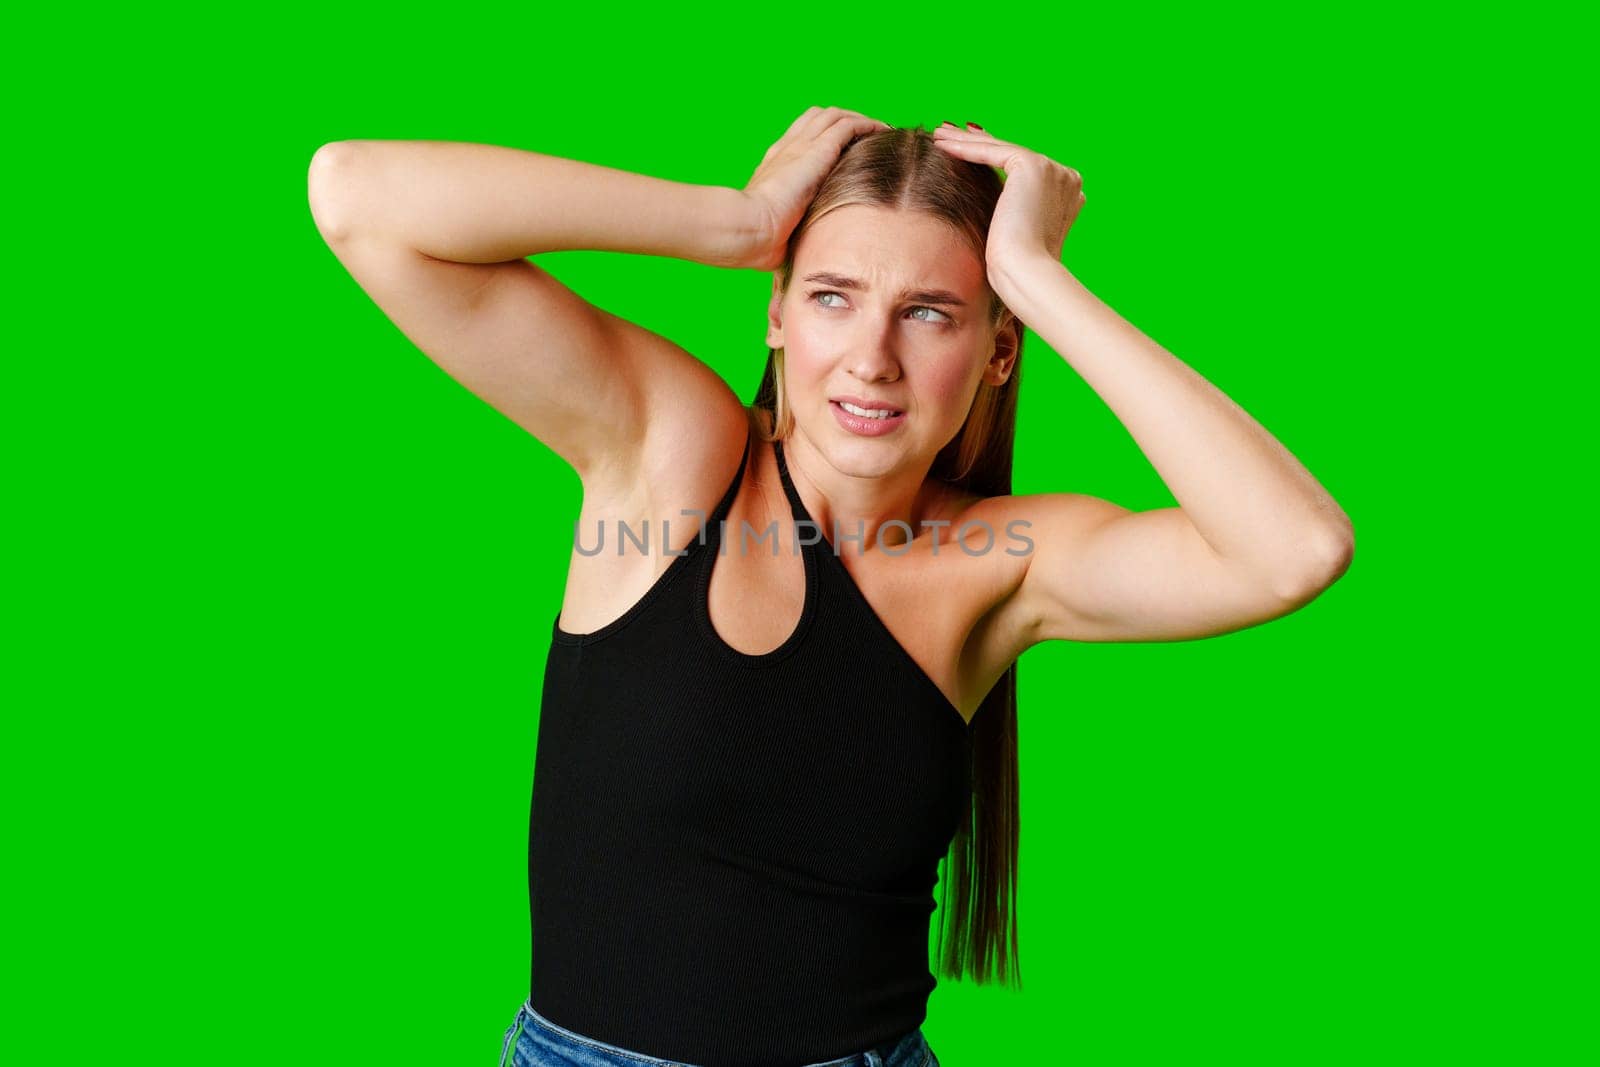 Young Woman Holding Hands Up to Head against green background by Fabrikasimf